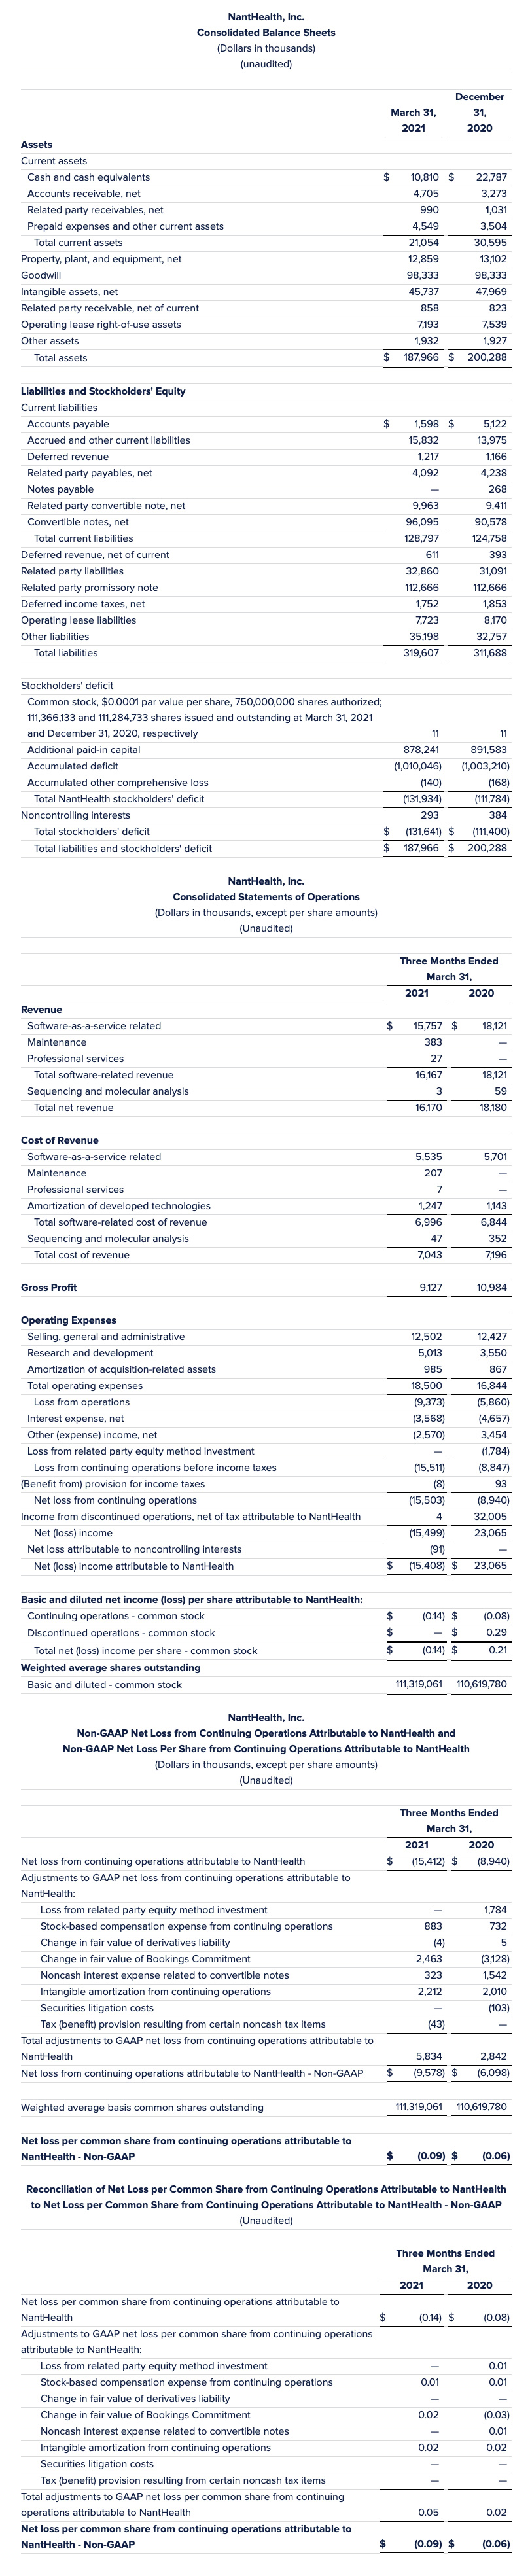 2021 First Quarter Financial Tables